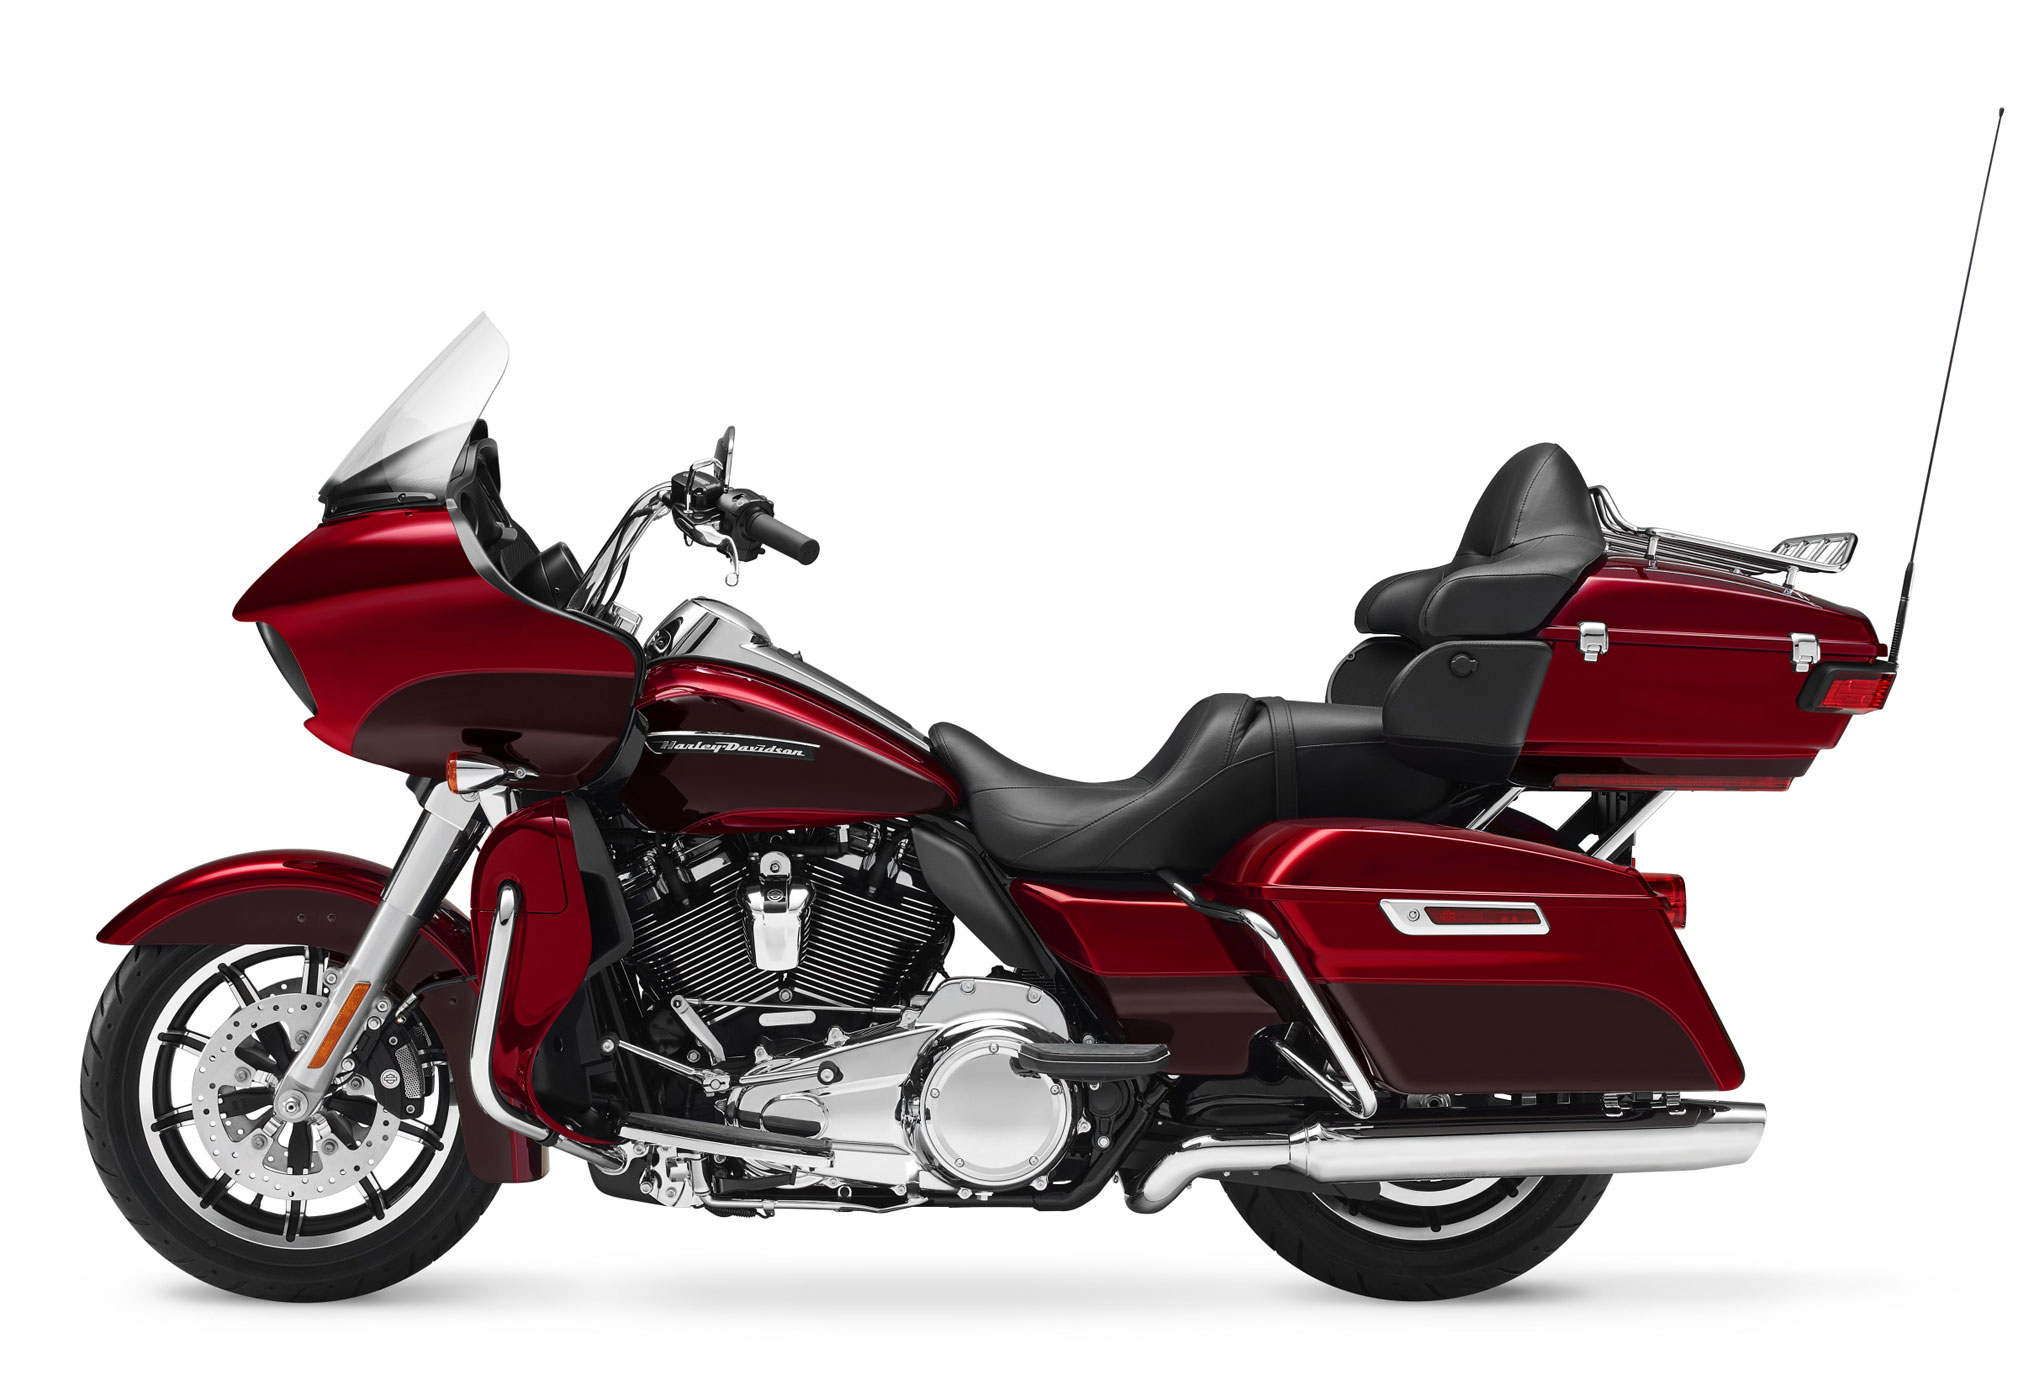 2018 Harley Davidson Road Glide Ultra Review Total Motorcycle